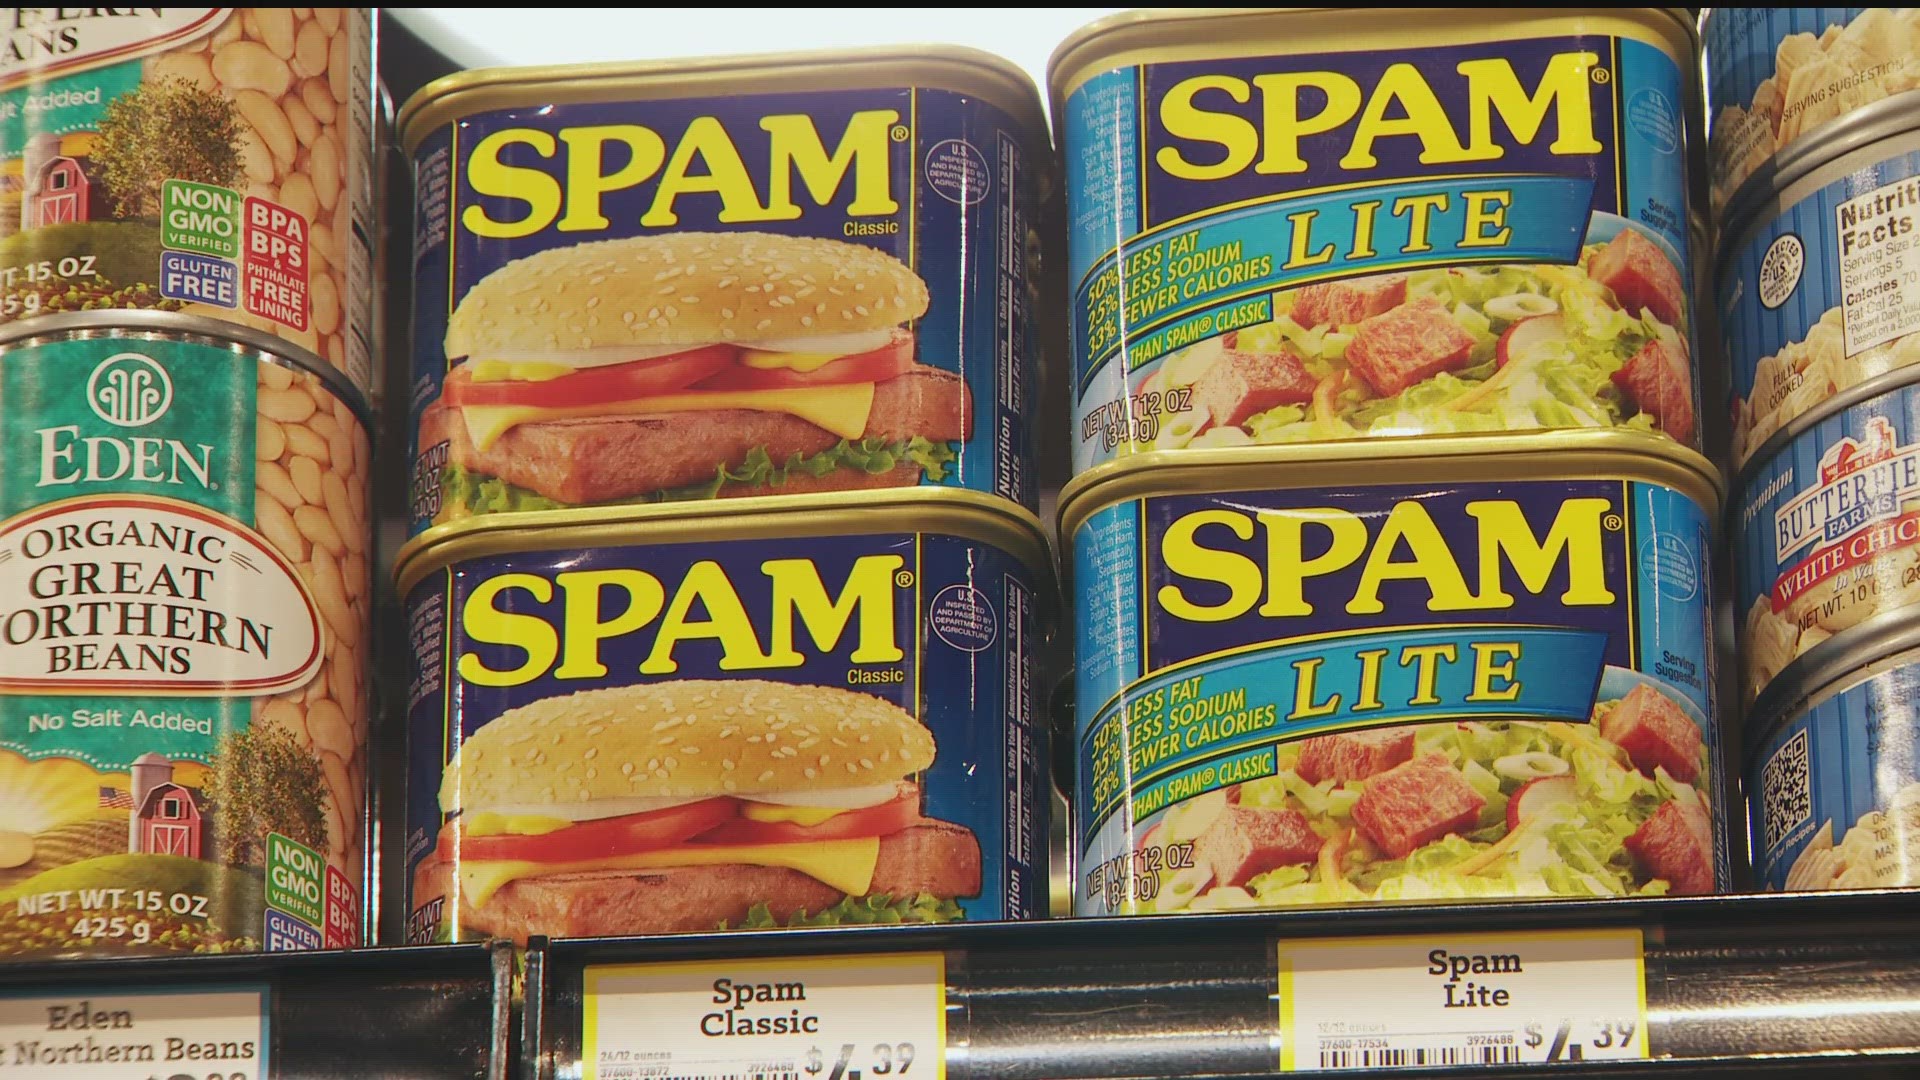 The Minnesota-based company announced that it's sending more than 264,000 cans of SPAM to Maui, and designed a new t-shirt to raise money for relief efforts.